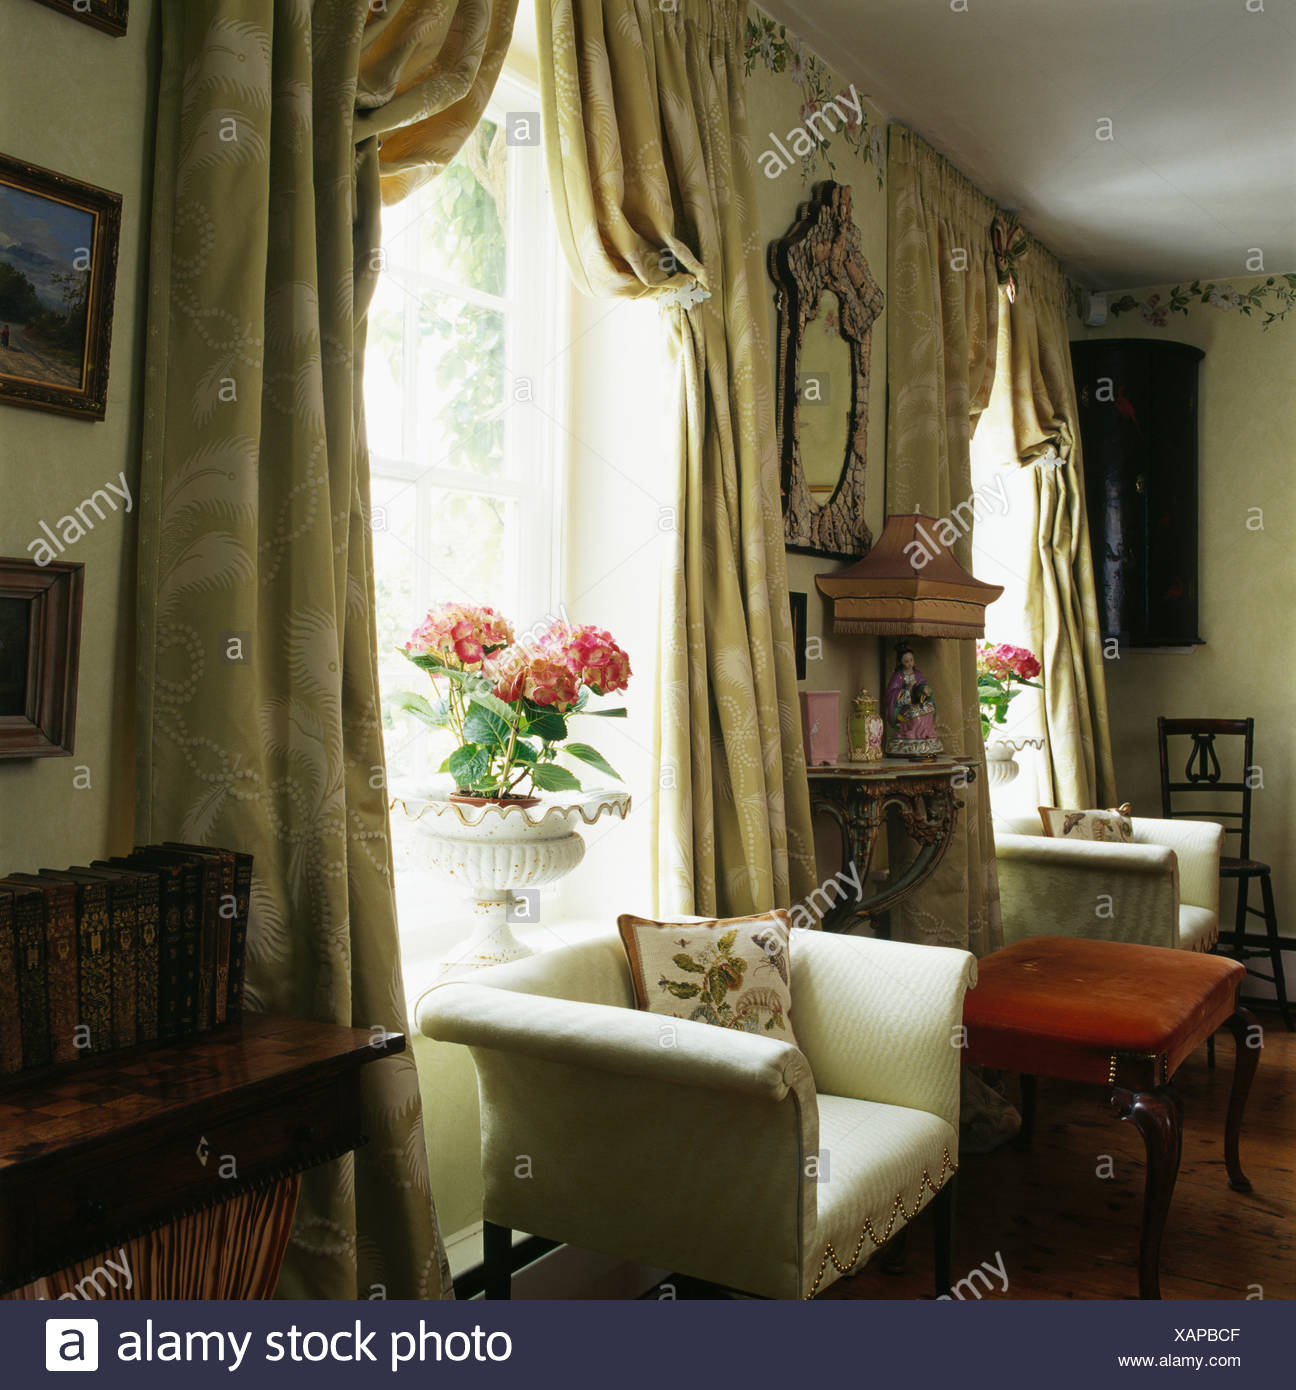 Cream Armchair In Front Of Window With Heavy Silk Curtains In Country Living Room Stock Photo Alamy